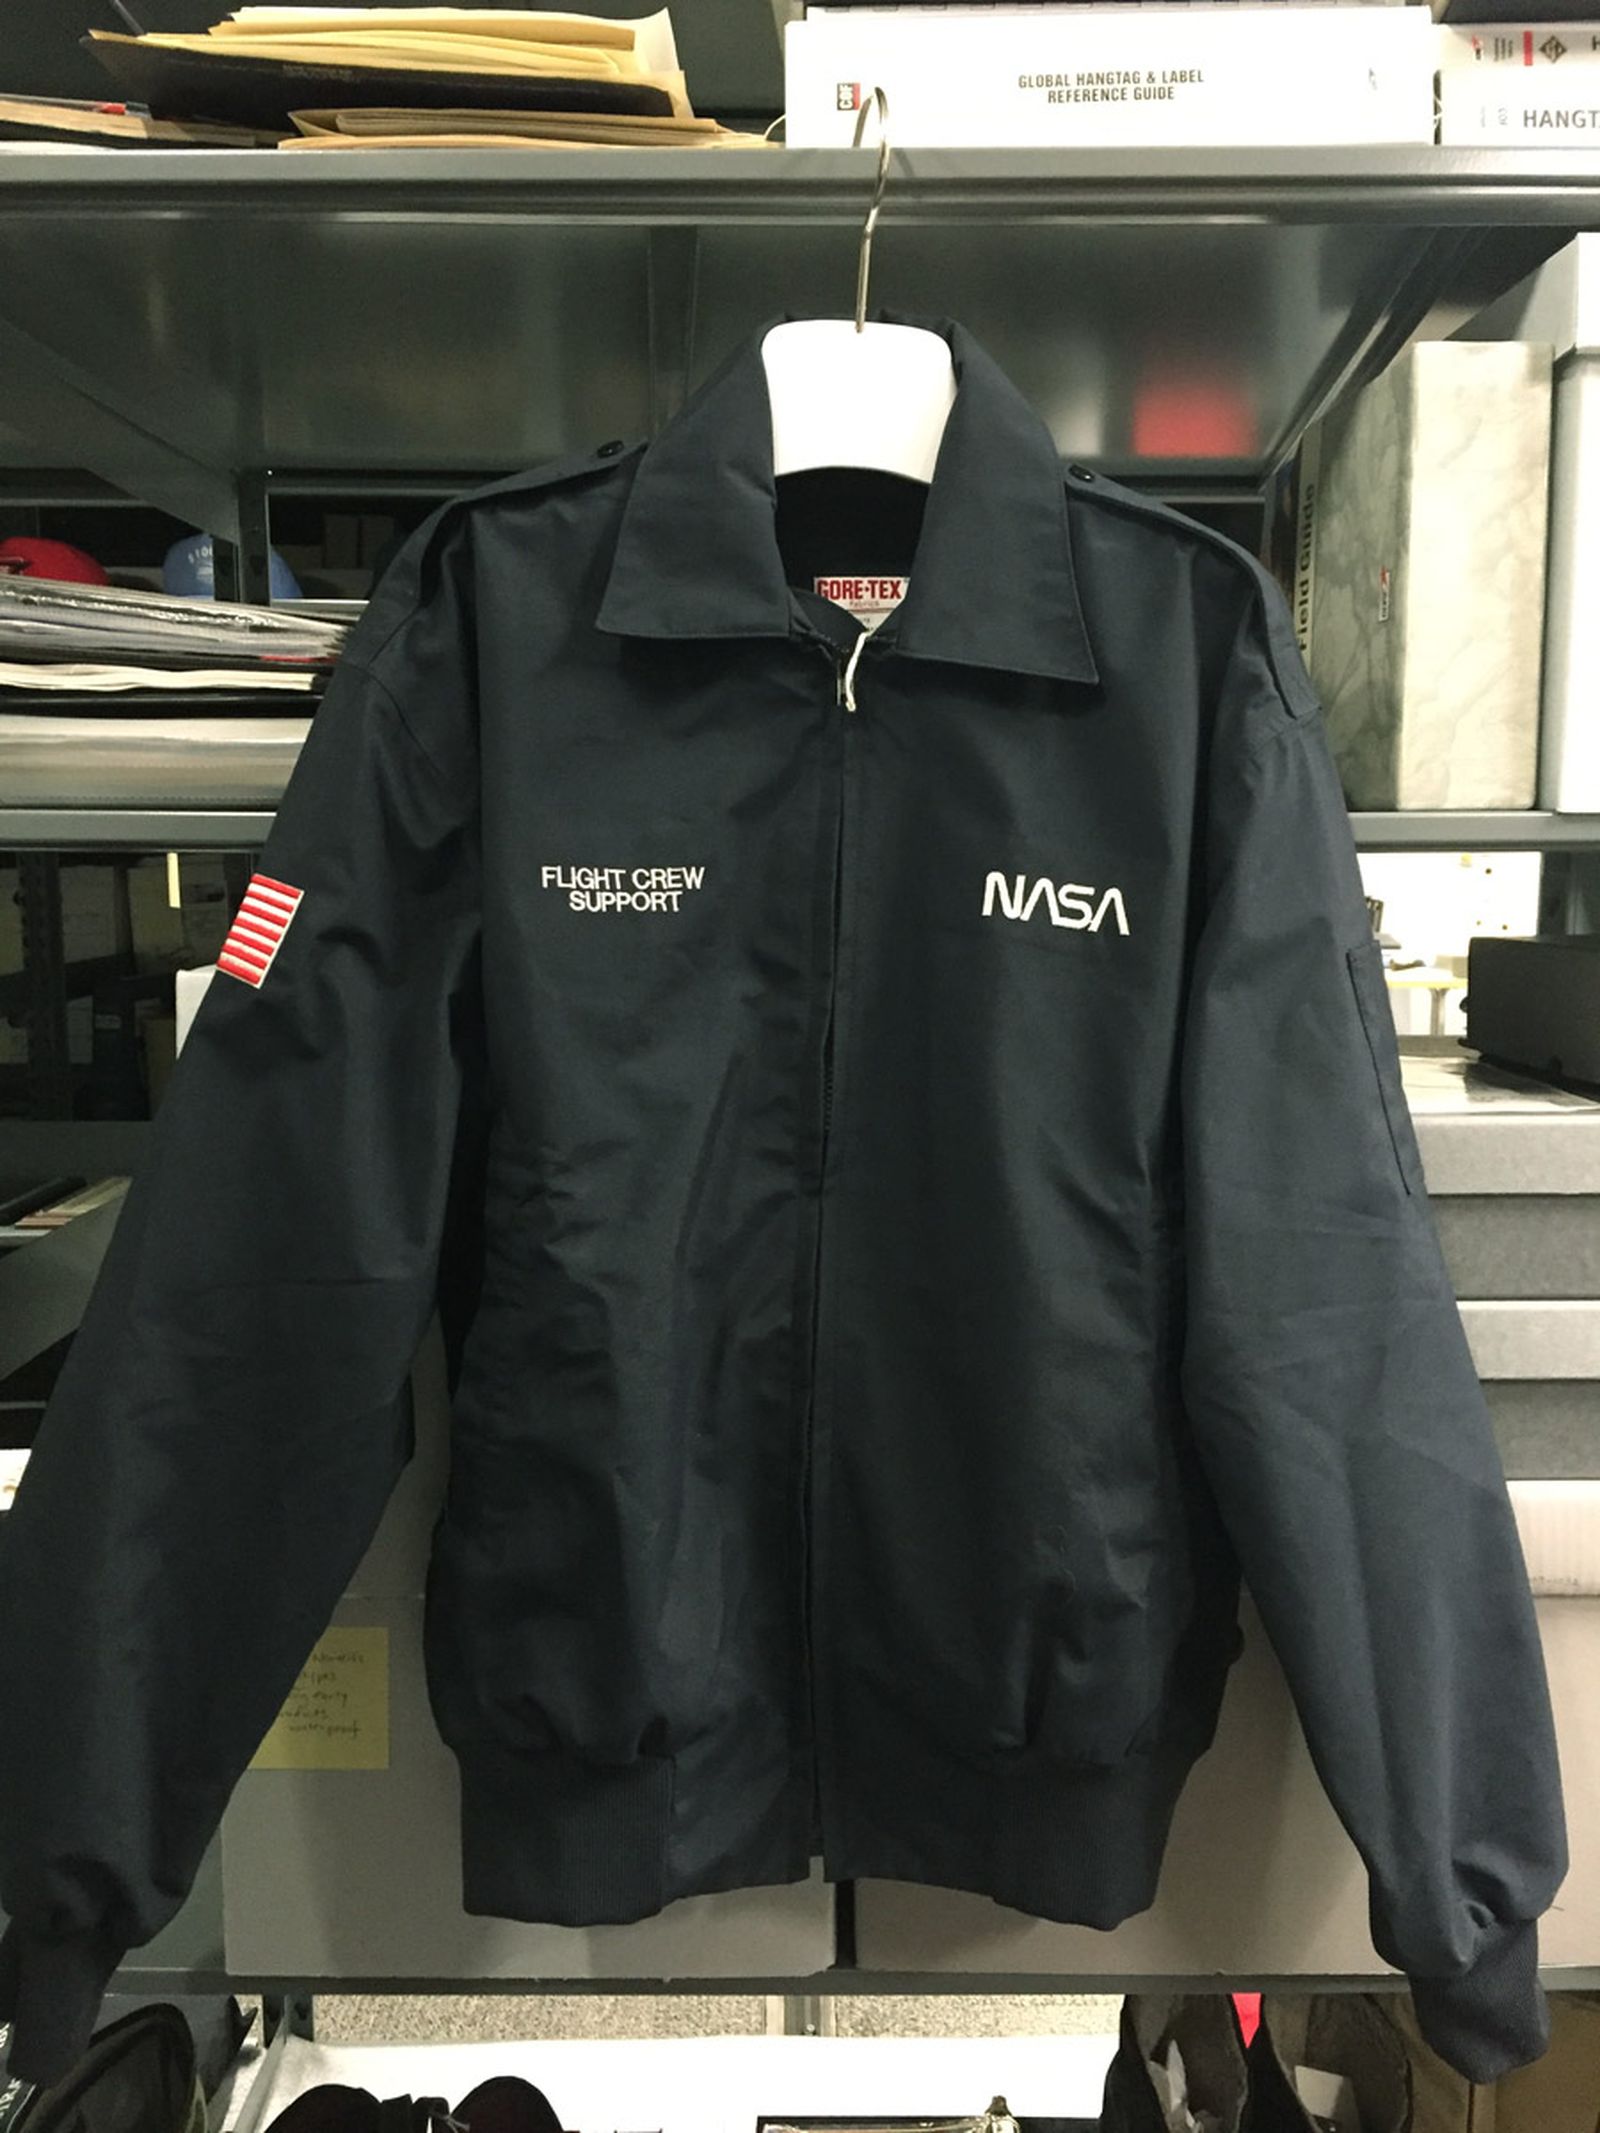 NASA jacket, shot by Haas at the W. L. Gore US archive